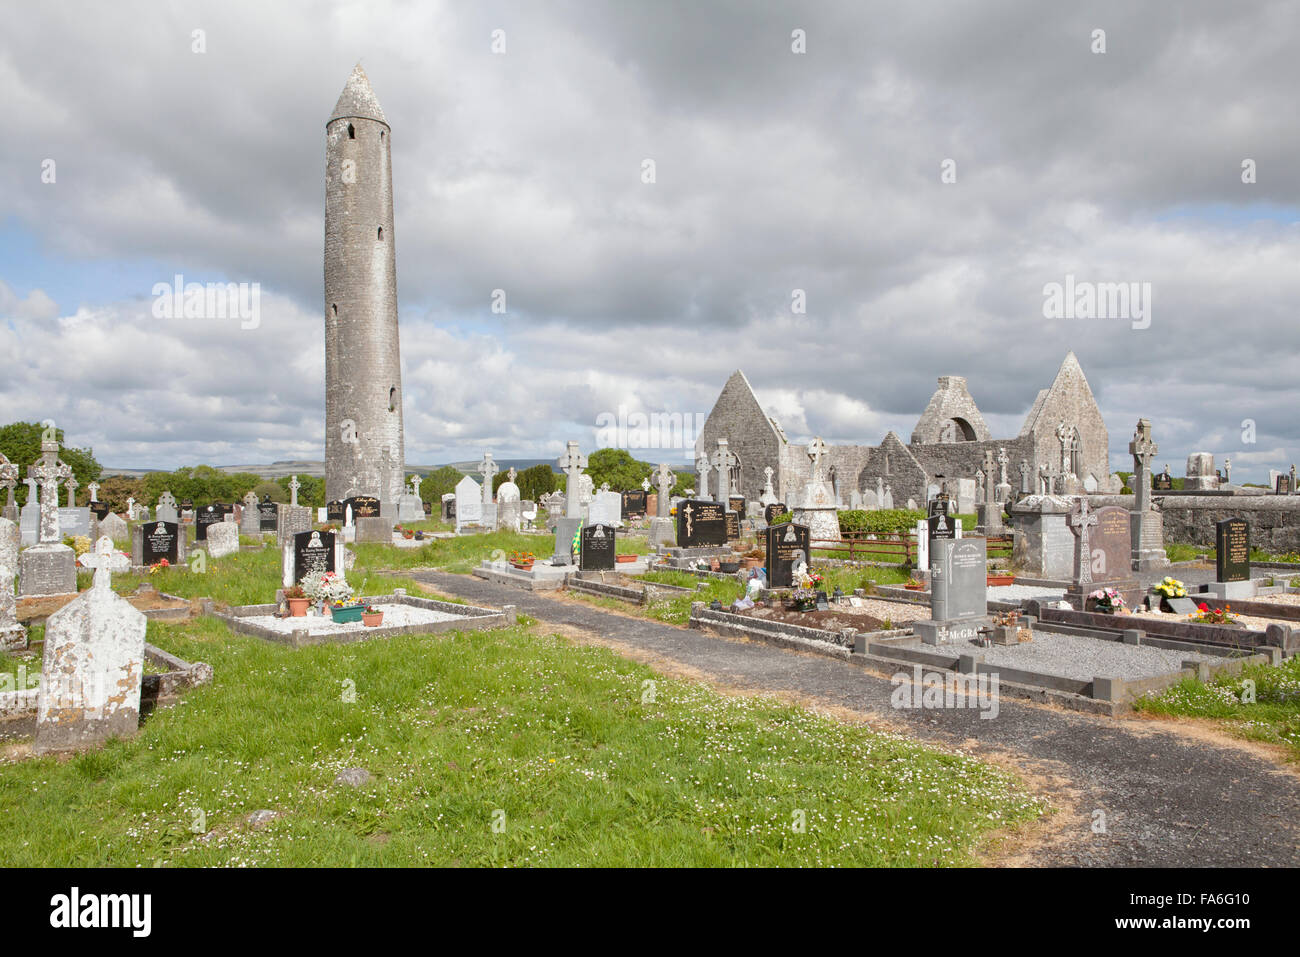 Kilmacduagh Monastery is a ruined abbey near the town of Gort in County Galway, Ireland Stock Photo